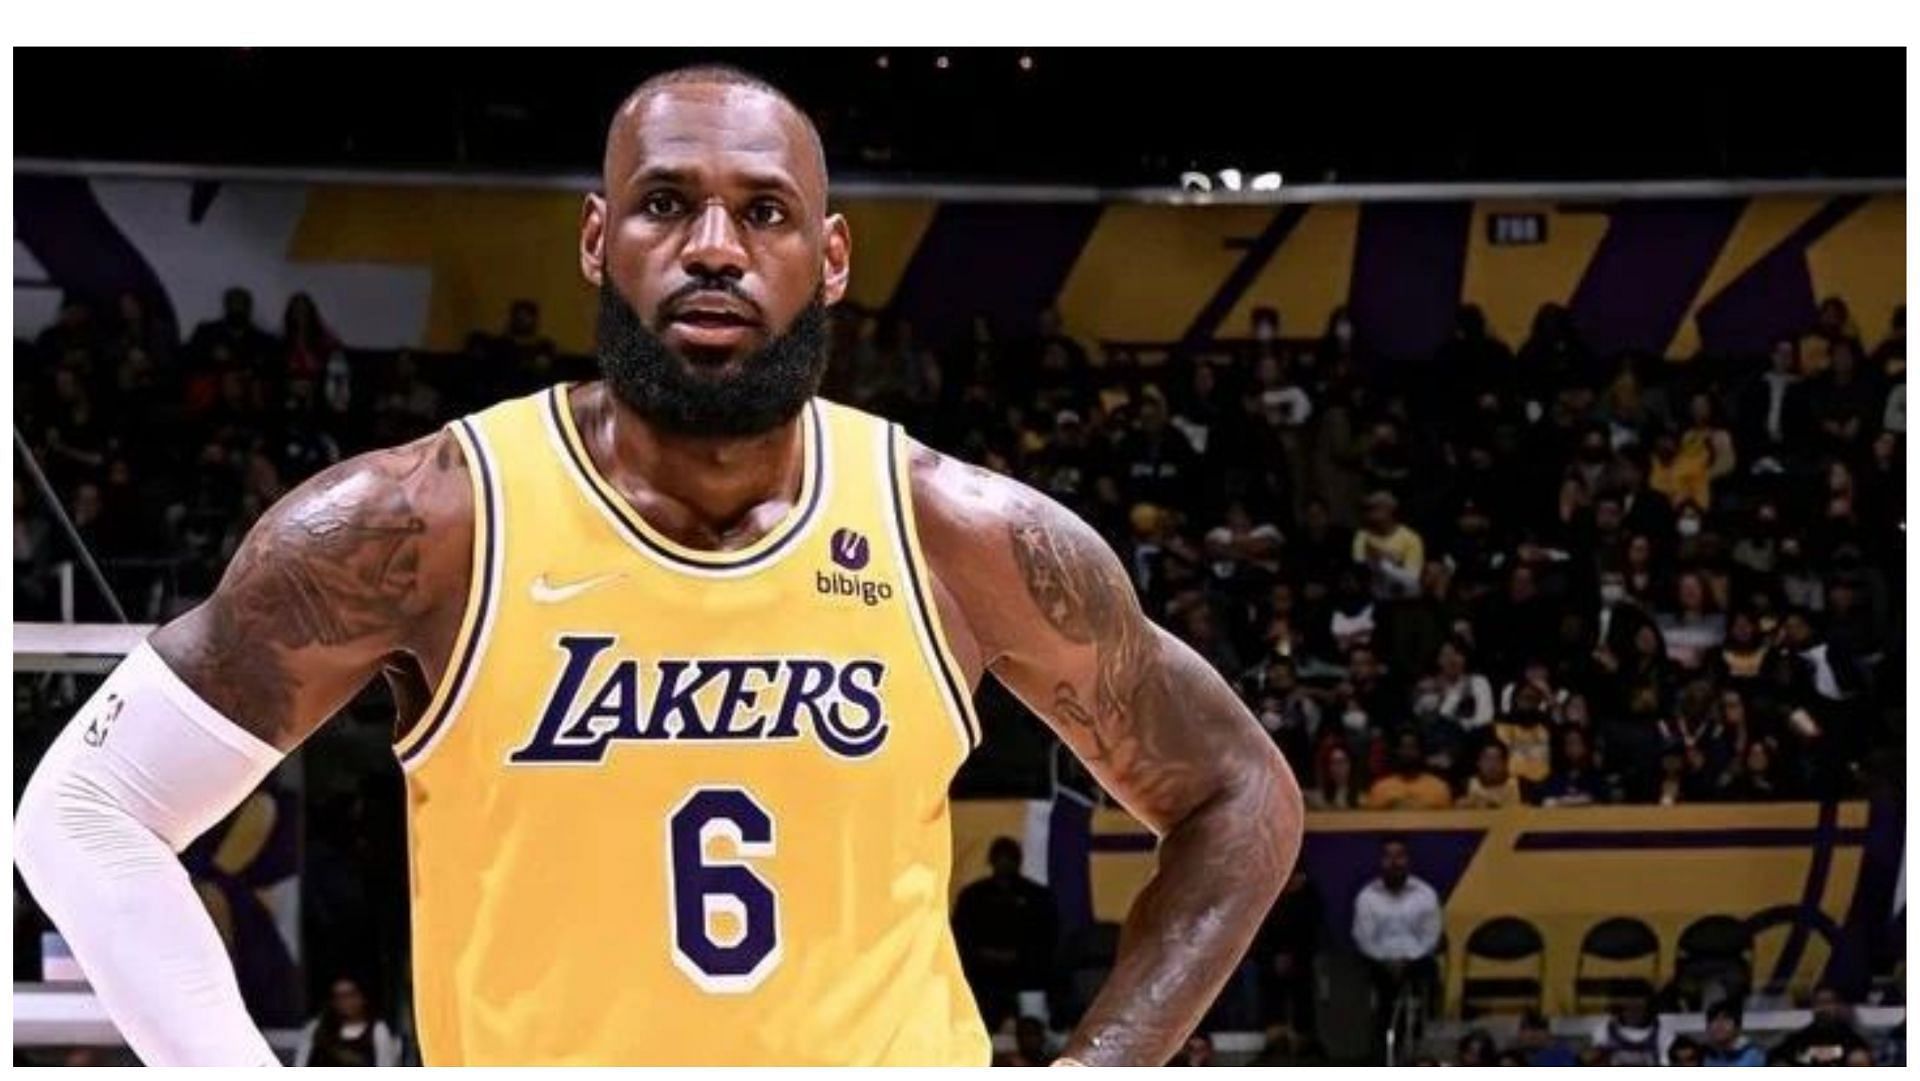 LeBron has played through 19 NBA seasons while remaining healthy, and at 37 years old, he shows no signs of slowing down. (Image via Instagram)